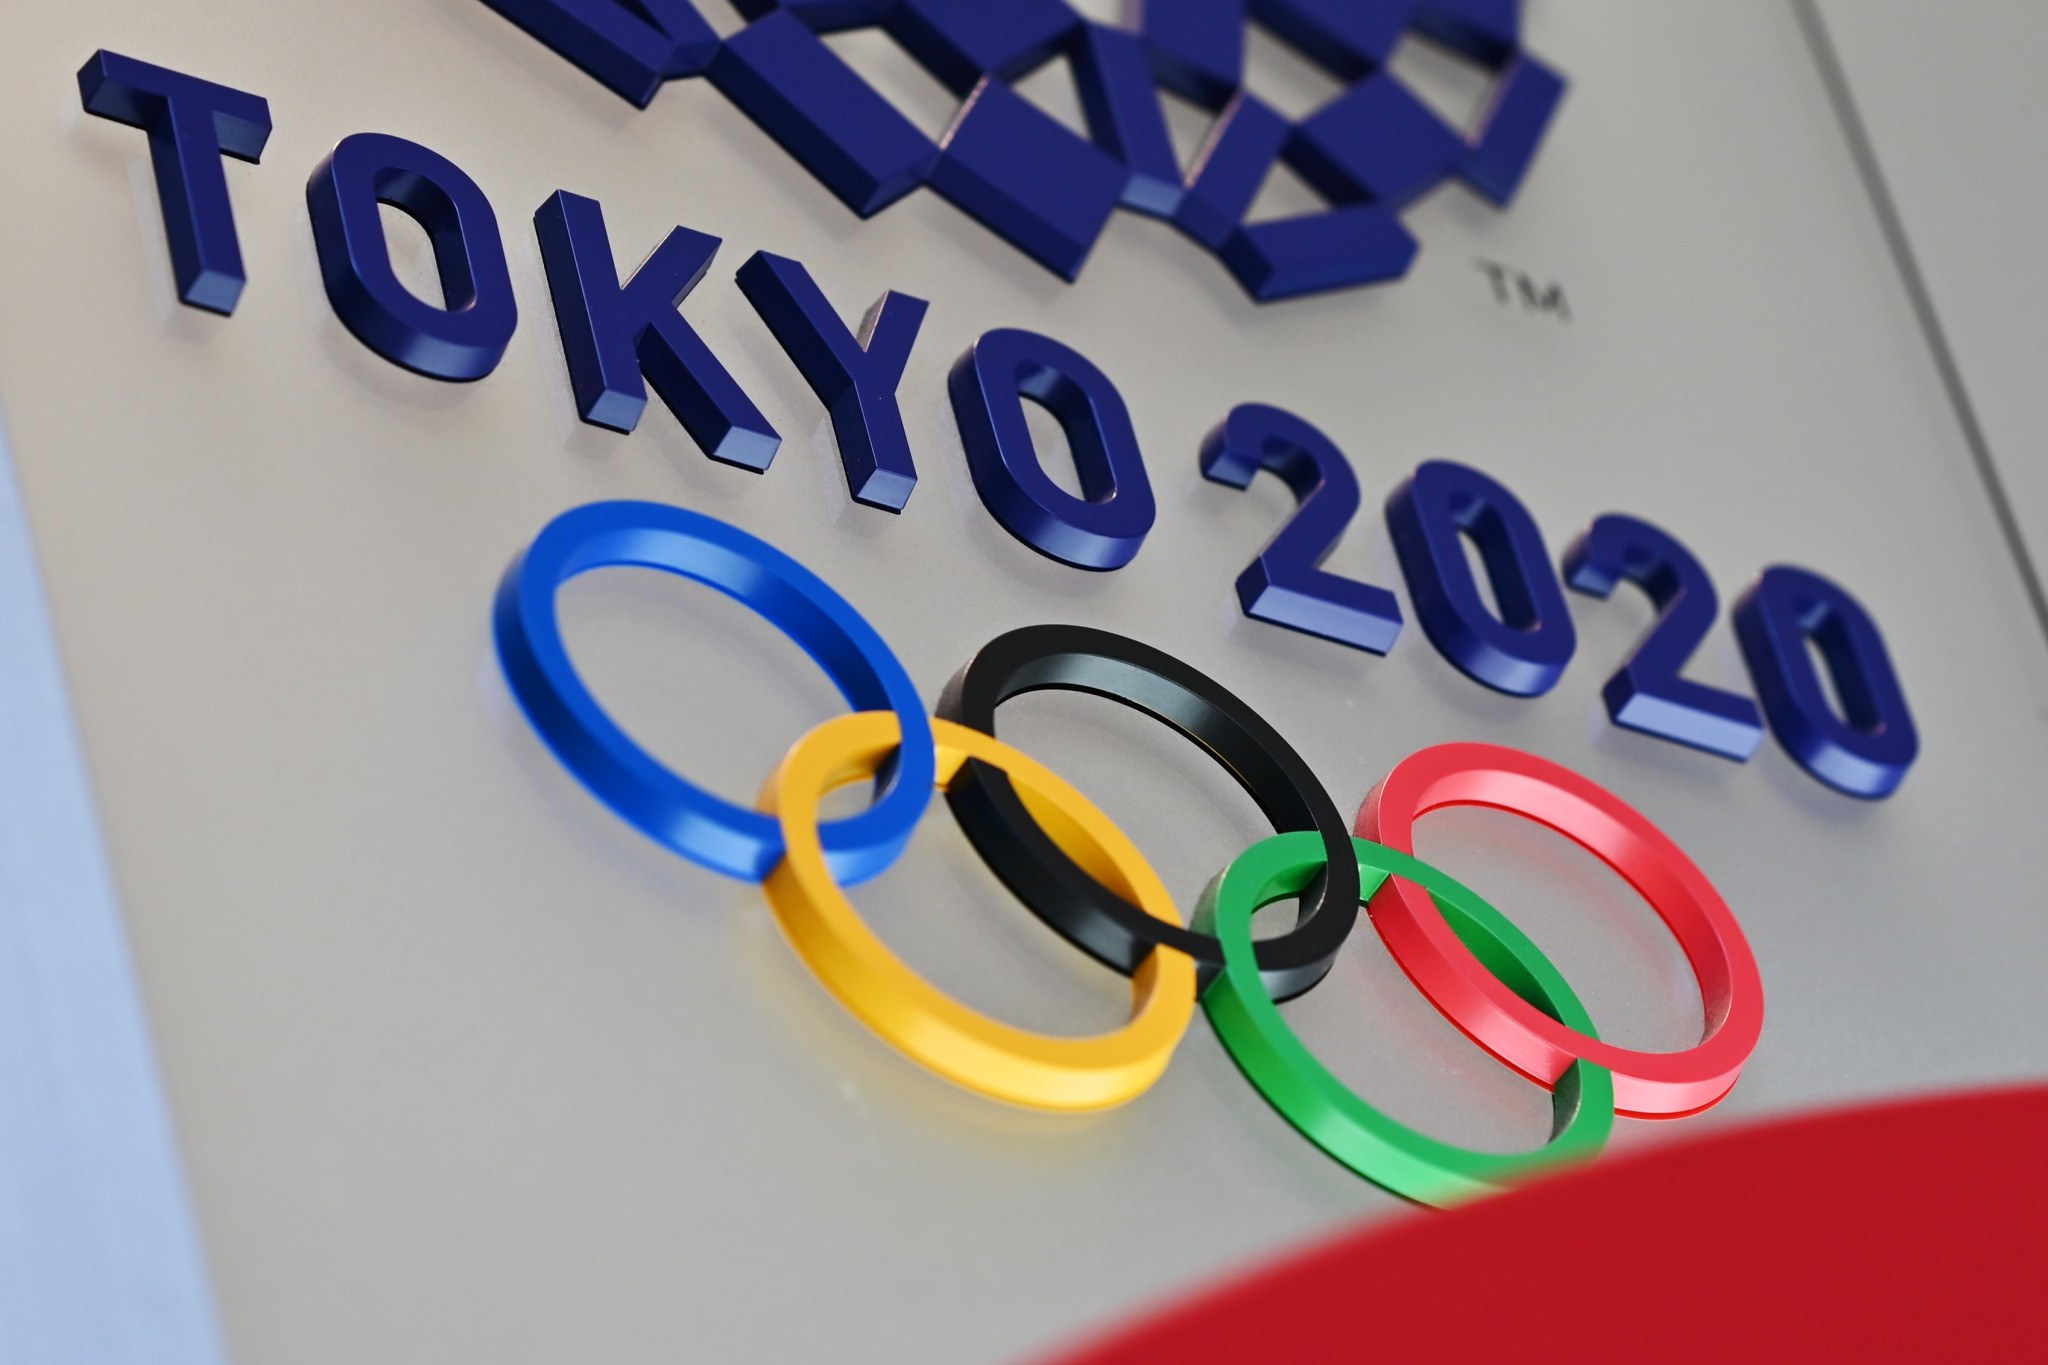 Tokyo 2020 organisers may require new office space following postponement ©Getty Images